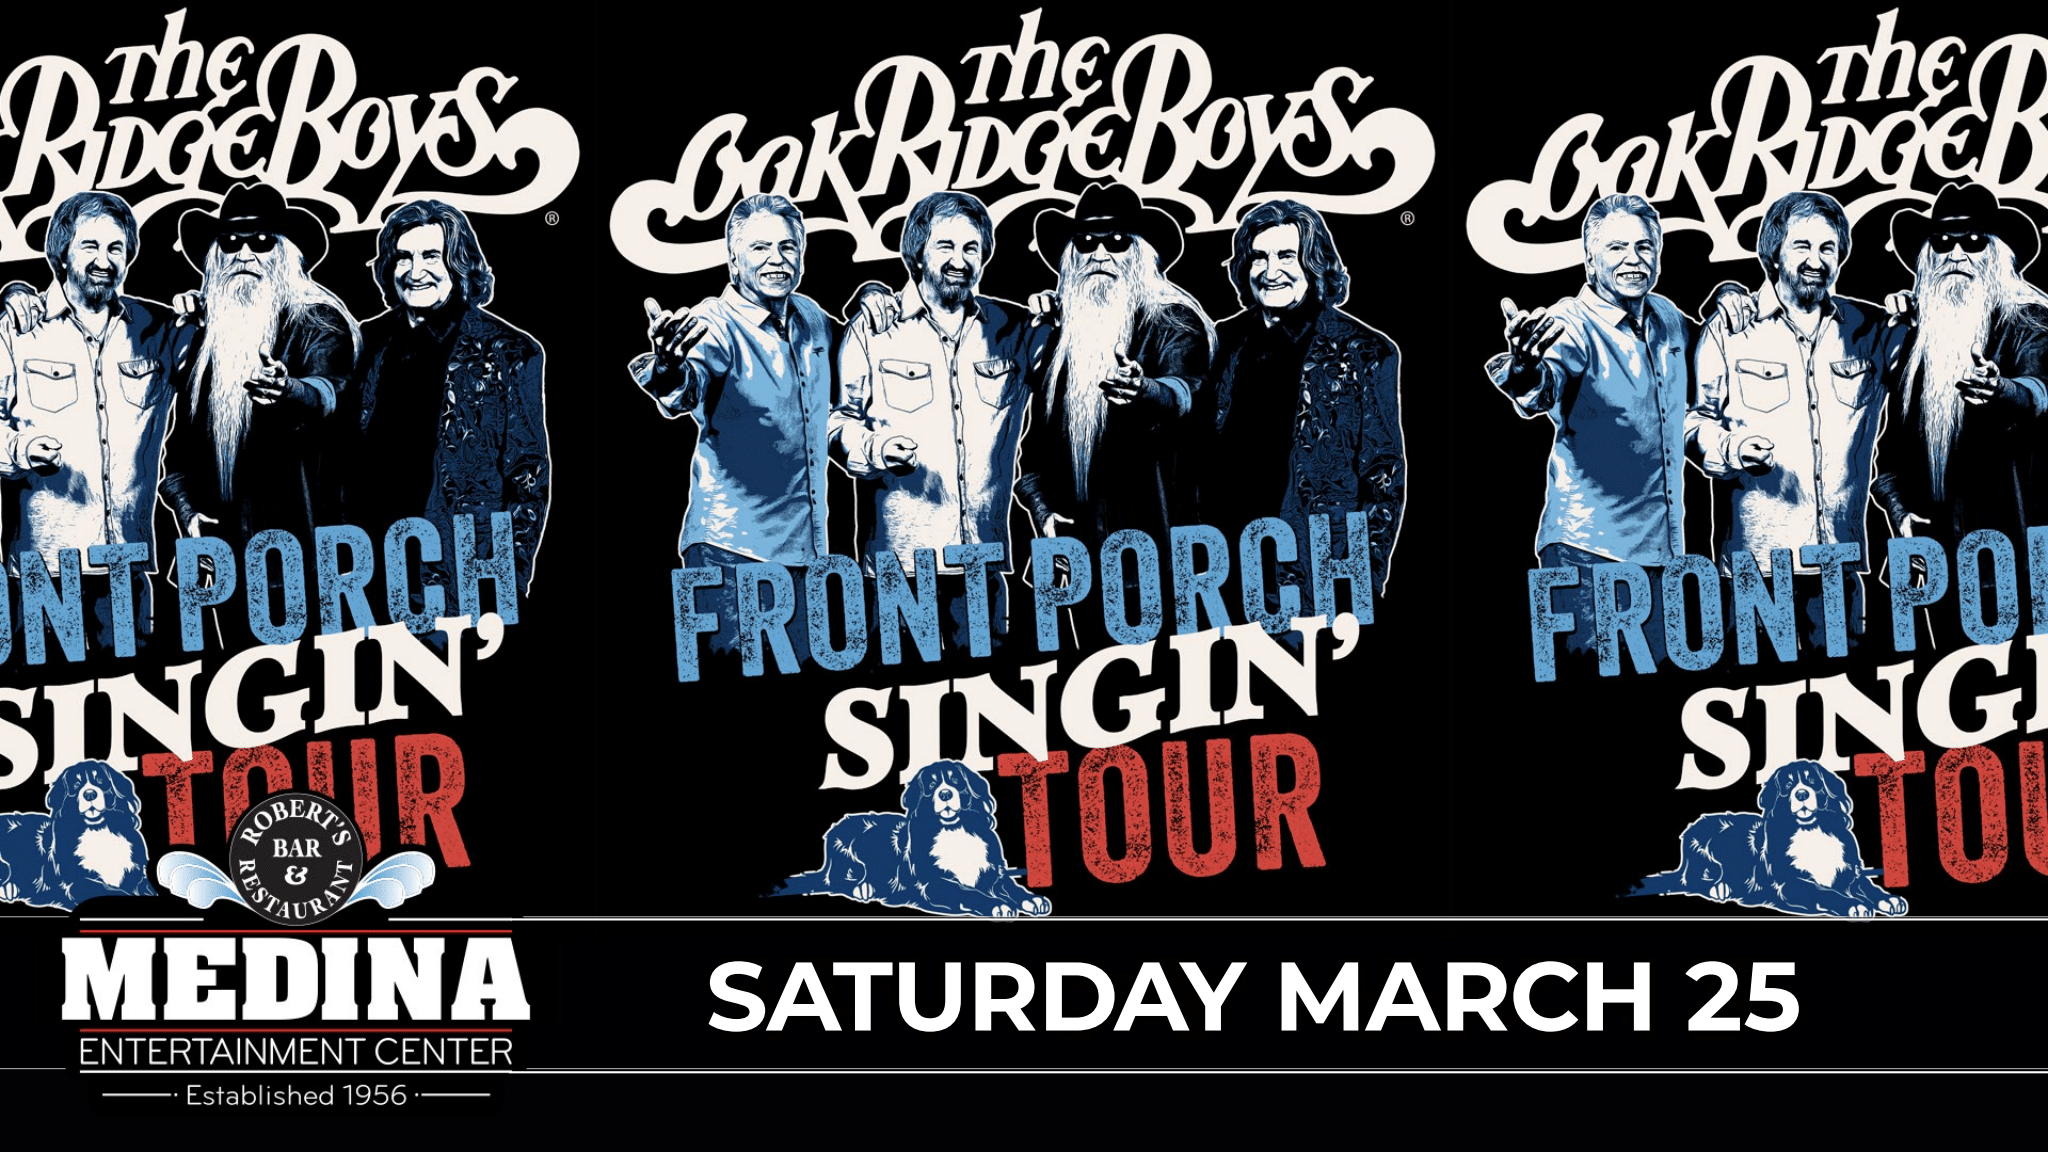 An Evening With The Oak Ridge Boys Front Porch Singin’ Tour Medina Entertainment Center Saturday, March 25th Doors: 7:30PM | Music: 8:30PM | 21+ Tickets on-sale Friday, December 9th at 11AM Ticket Prices: $53.00 (Gold Seating), $46.00 (Silver Seating) & $36.00 (GA Seating) plus applicable fees